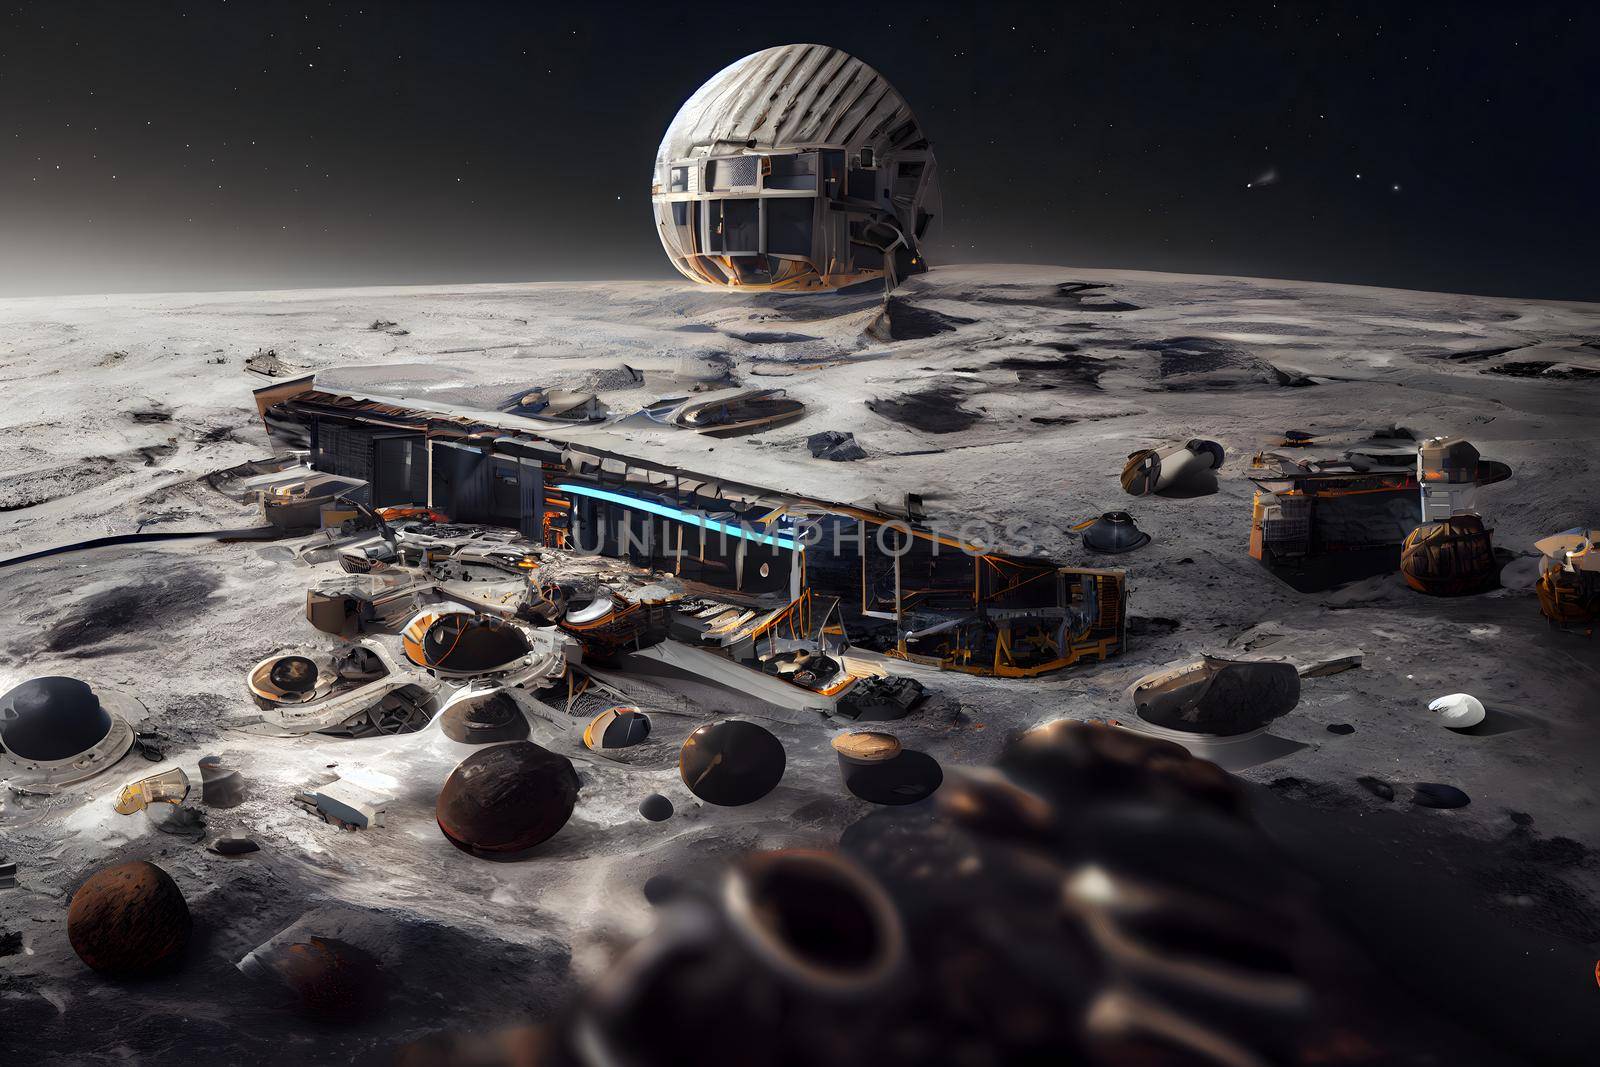 future moon base structures, neural network generated art. Digitally generated image. Not based on any actual scene or pattern.